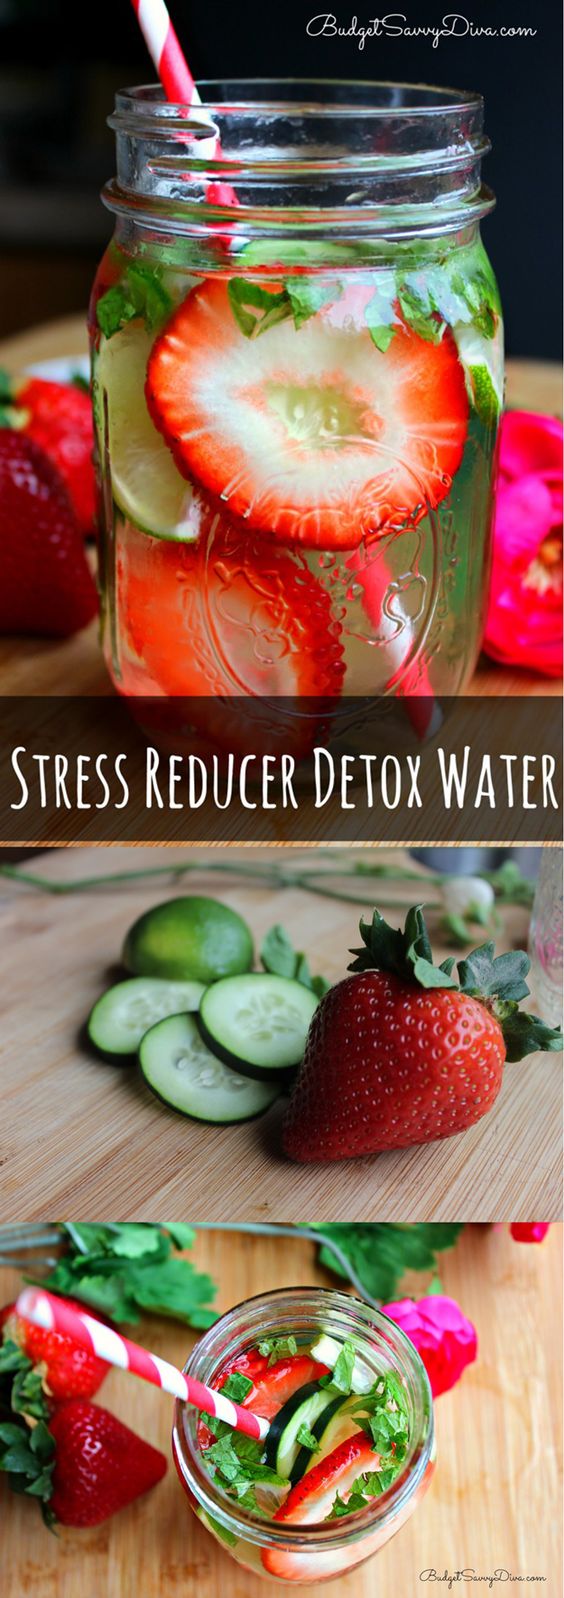 Stress Relief Drinks: Stress Reducer Detox Water | Easy Healthy Detox Water Recipe